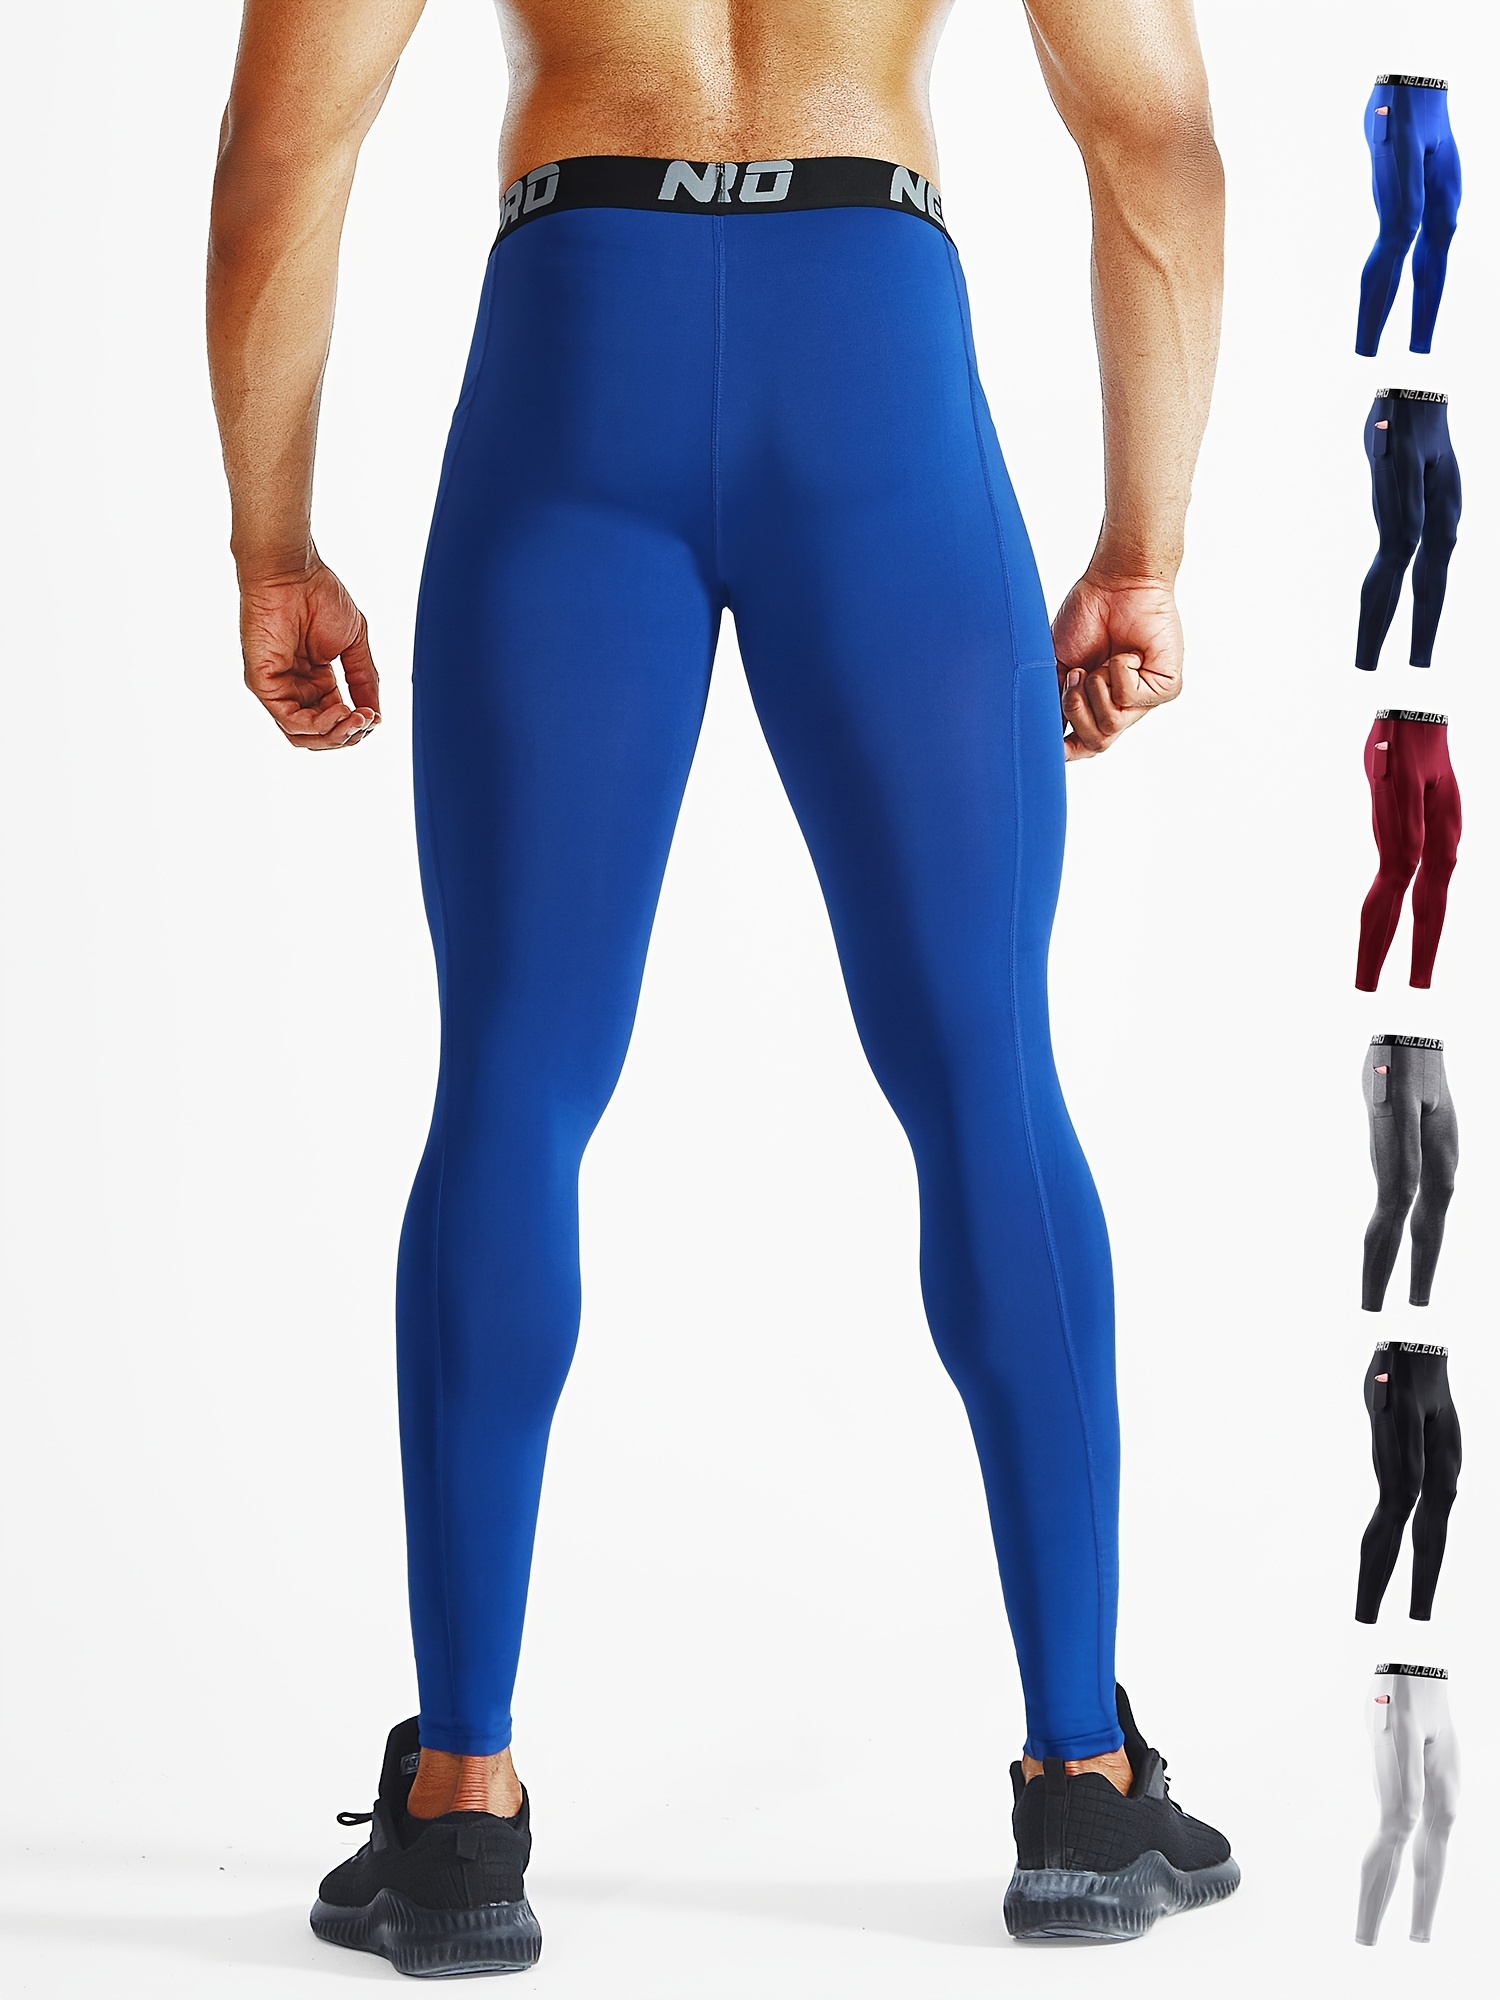 SUPERBODY Men's Compression Cool Dry Sports Tights Pants Running